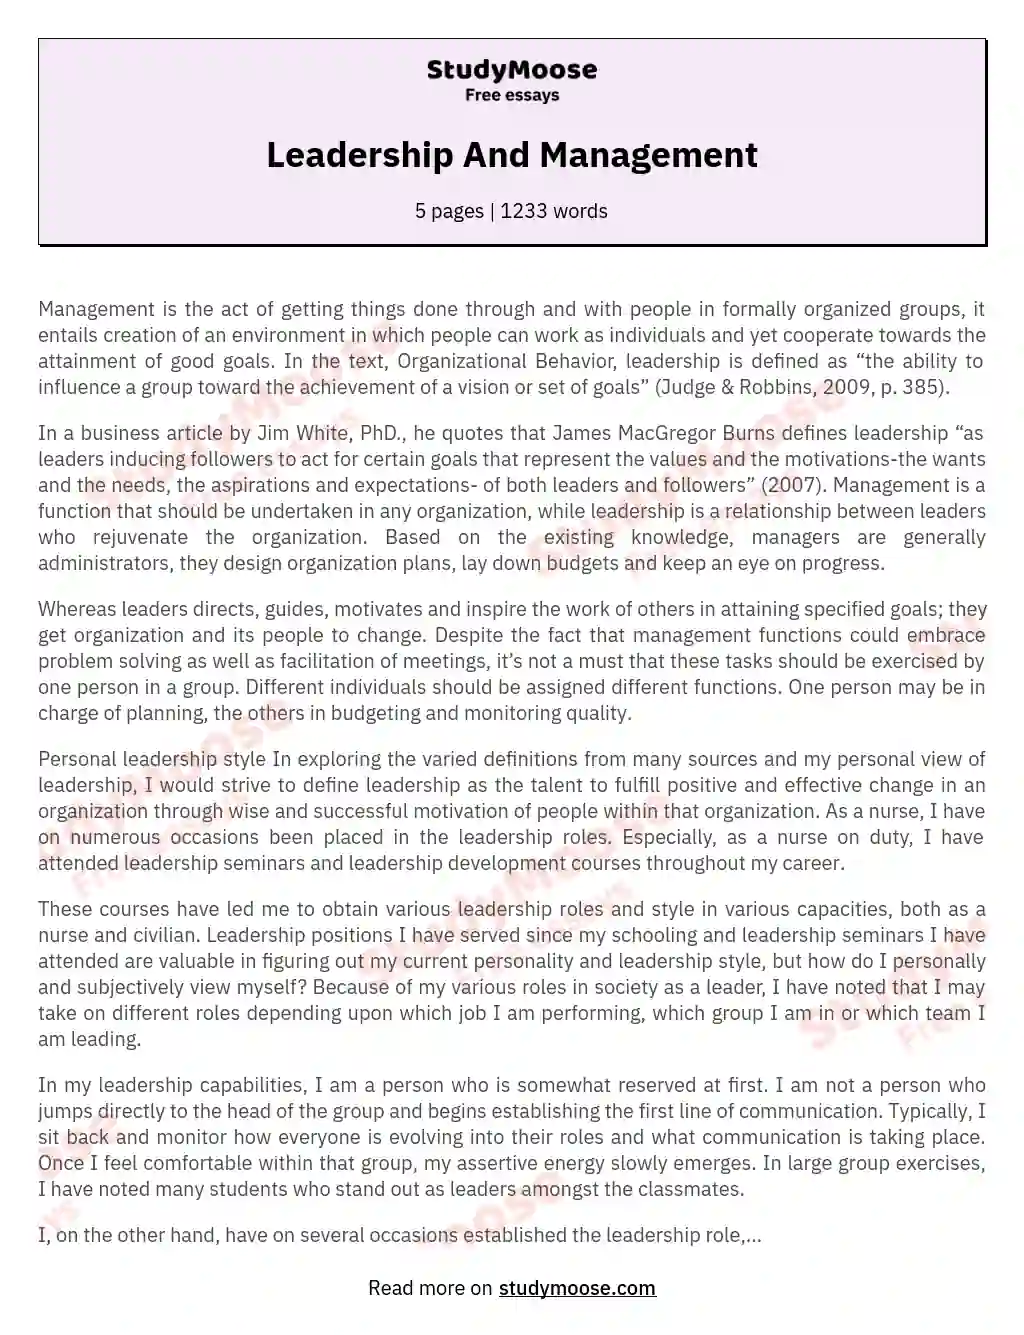 Leadership And Management essay